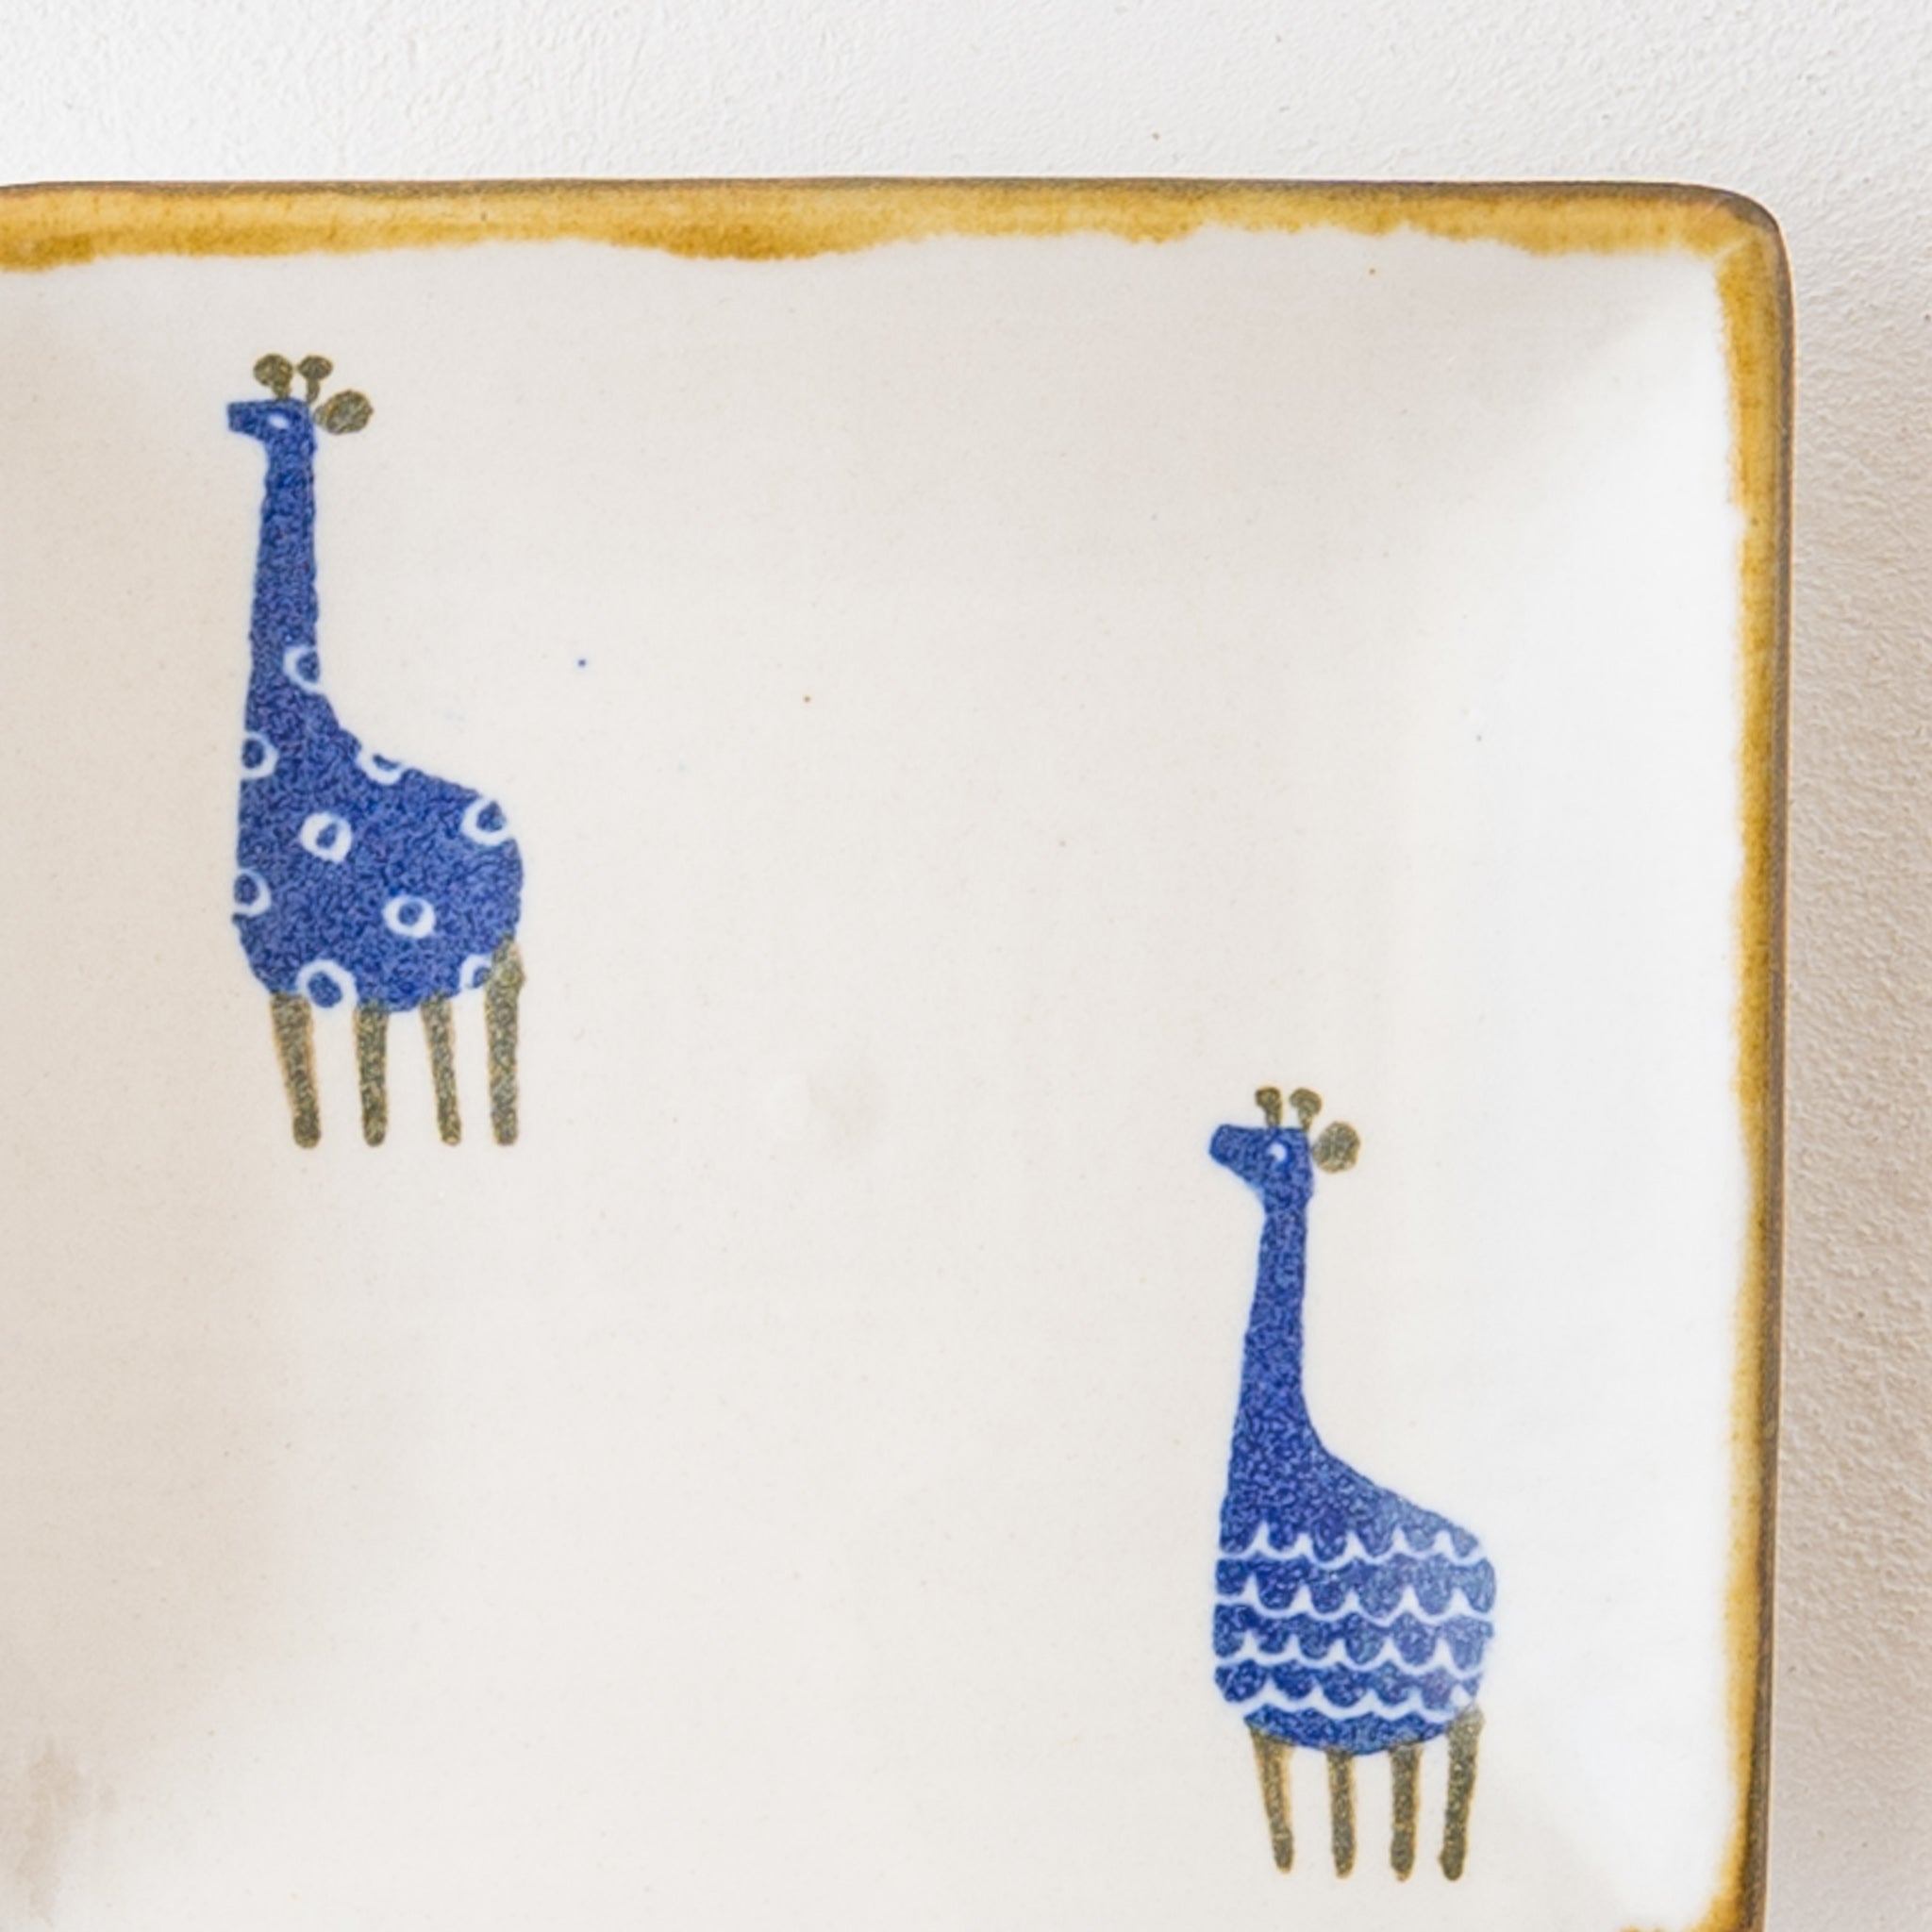 A small square plate from Yasumi Koubou that is soothing with its gentle Japanese paper dyeing